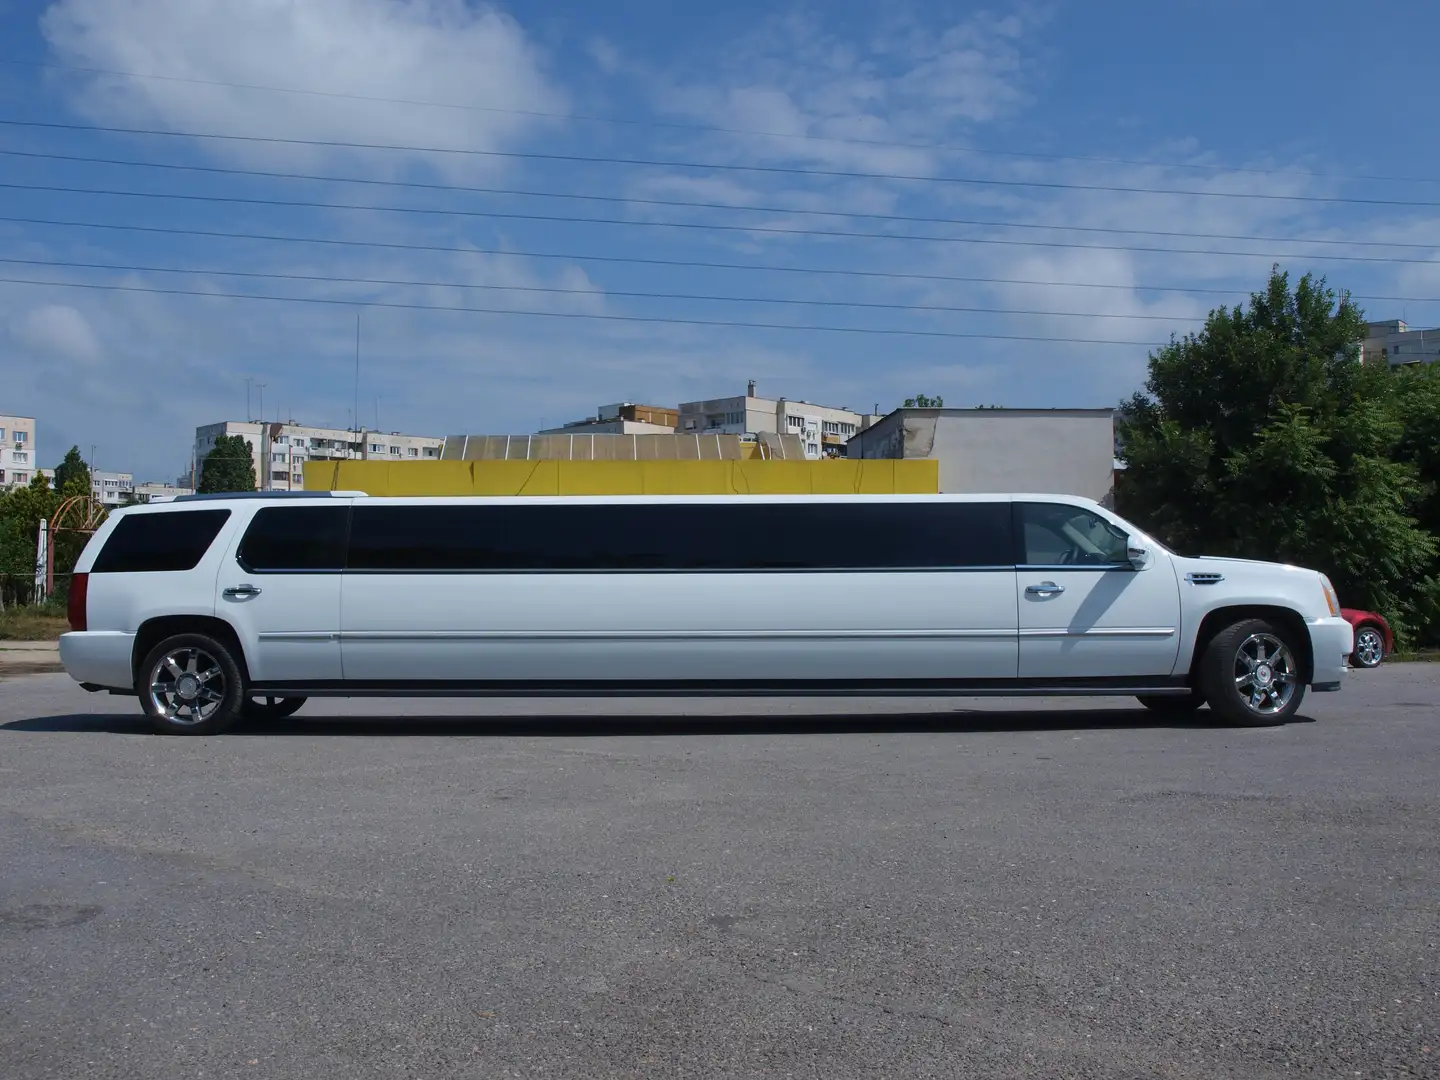 Cadillac Escalade 203-inch Stretch Limousine by Moonlight Industries White - 2